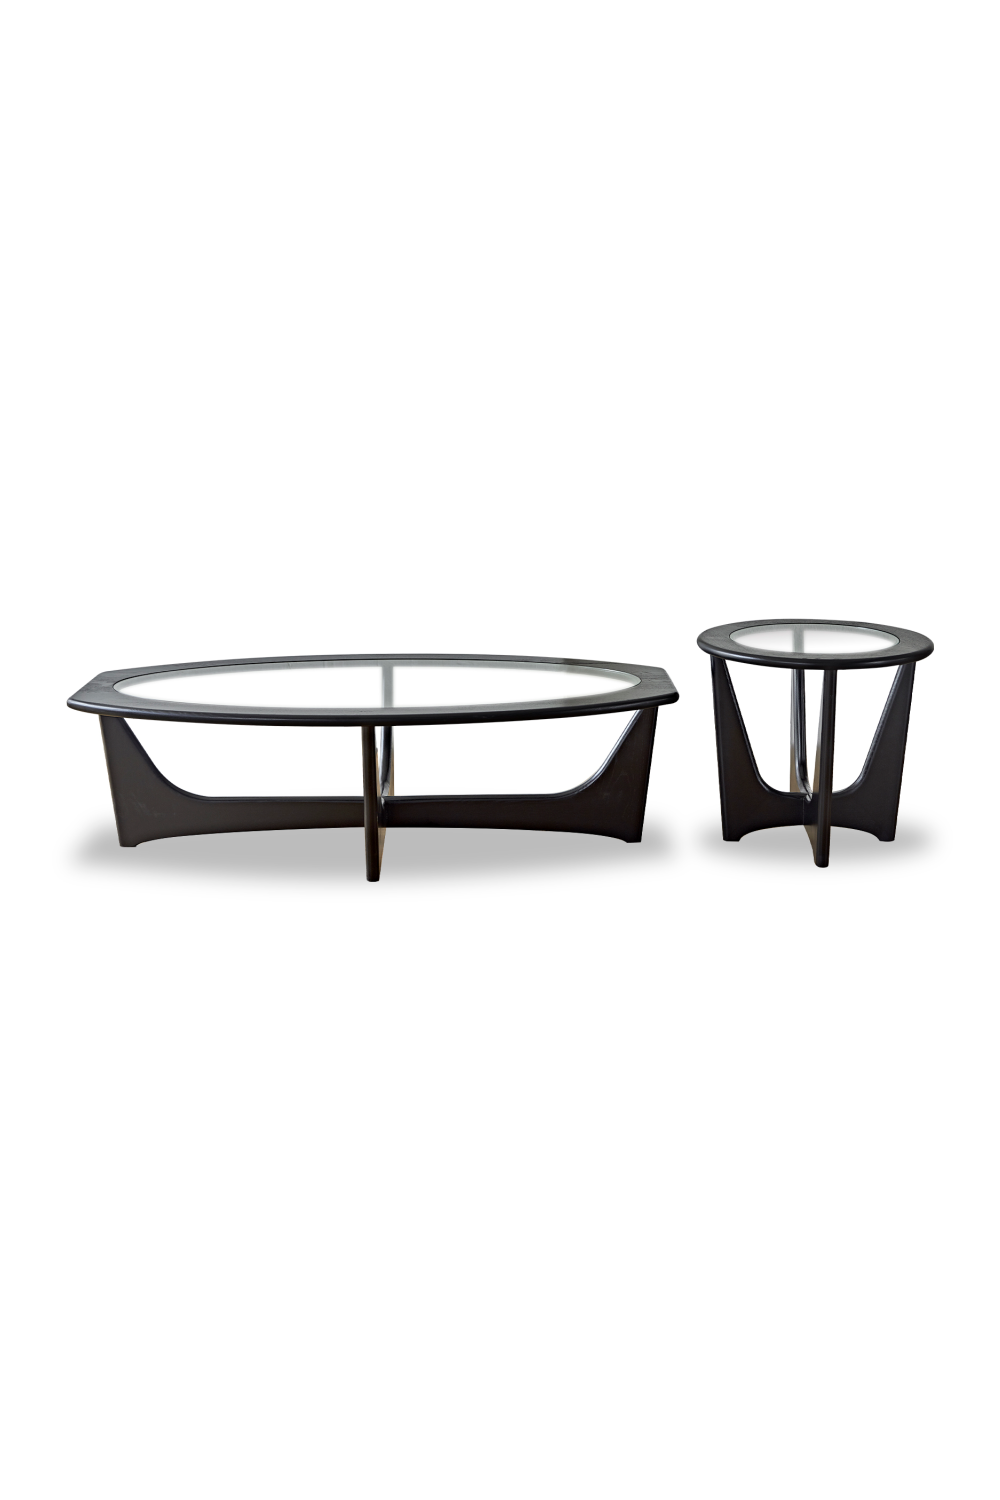 Glass Top Black Wooden Side Table | Liang & Eimil Sculpto | OROA.com